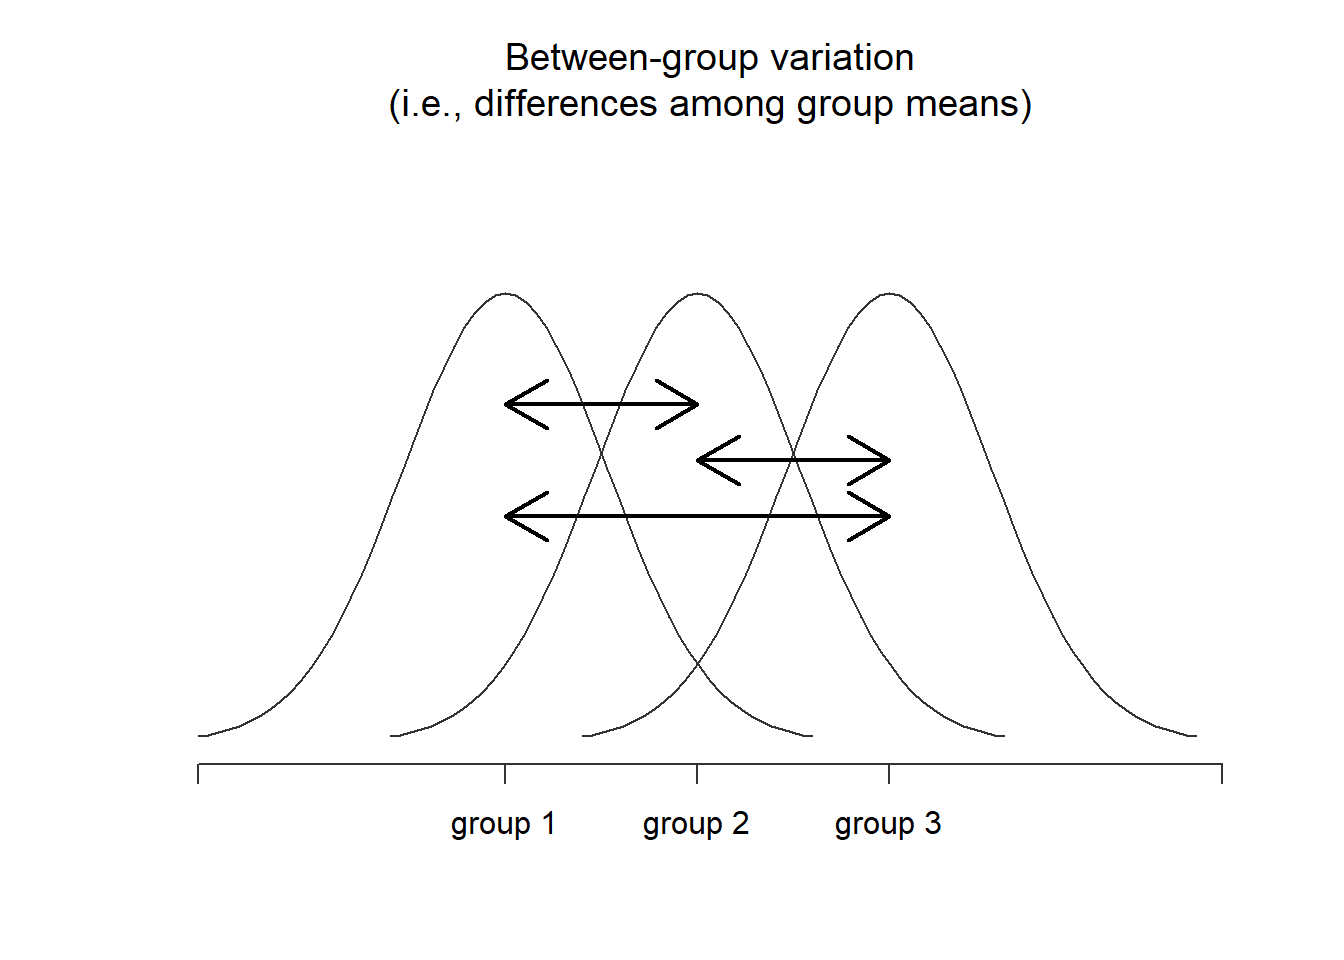 Graphical illustration of "between groups" variation